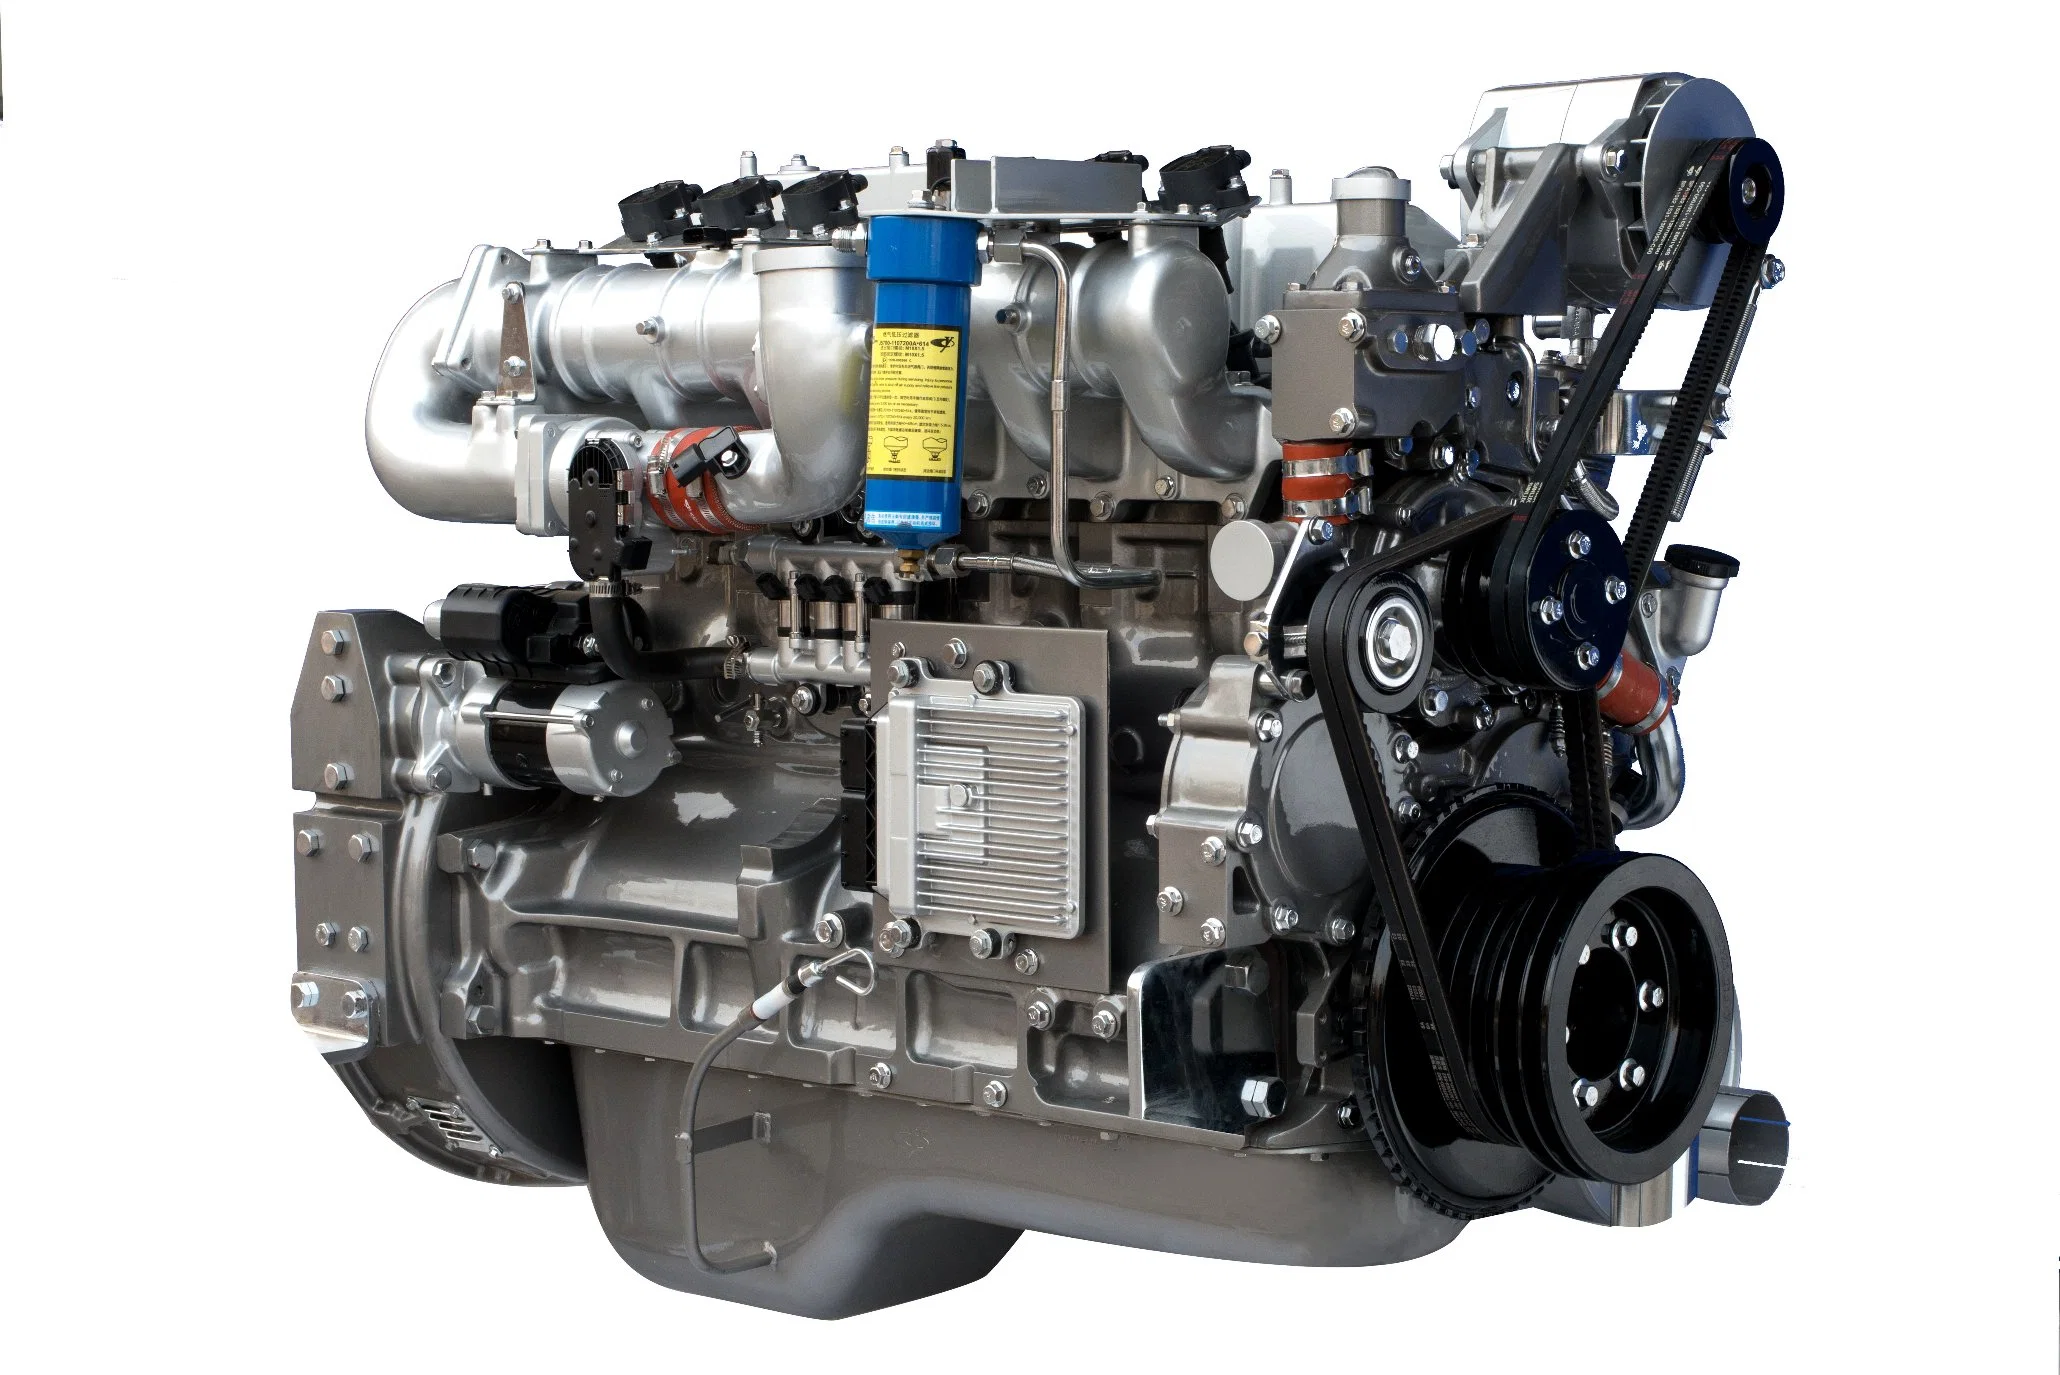 High Quality 6 Cylinder Yuchai YC6GN Euro 5 Emission Classic Gas Engine with Good Power Performance, Good Economy, High Reliability, Low Vibration & Noise